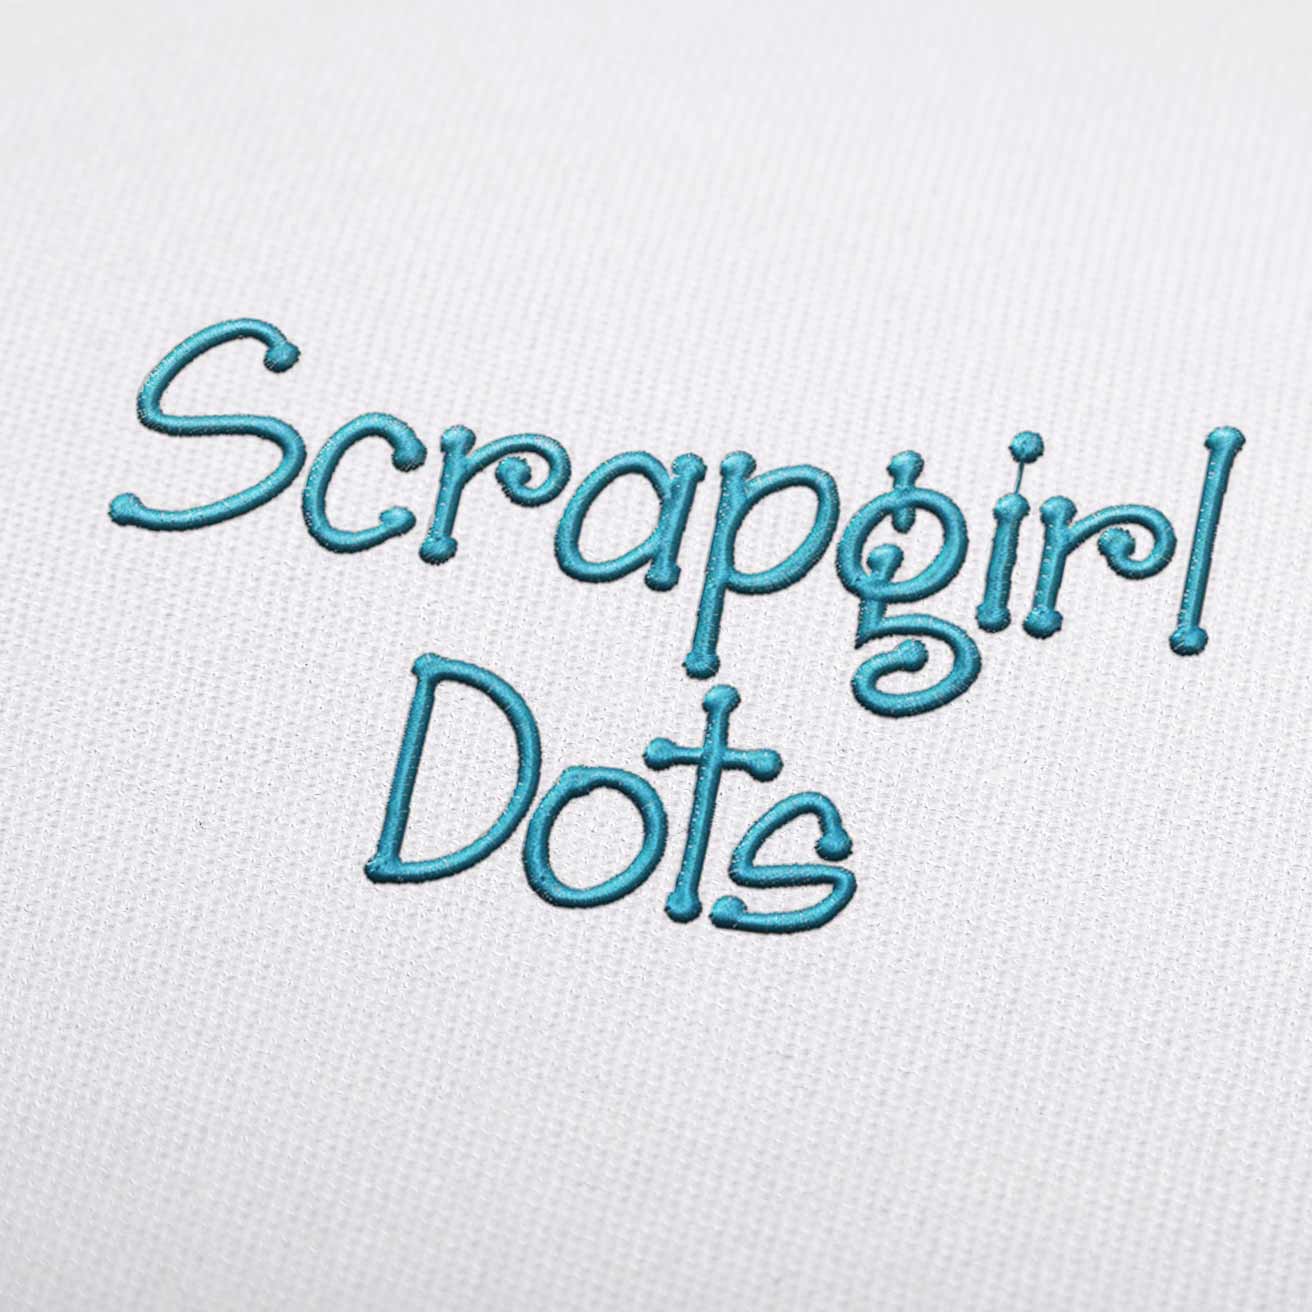 Scrapgirl Dots Font Machine Embroidery Design Fonts 3 Sizes Alphabets All Formats Instant Download